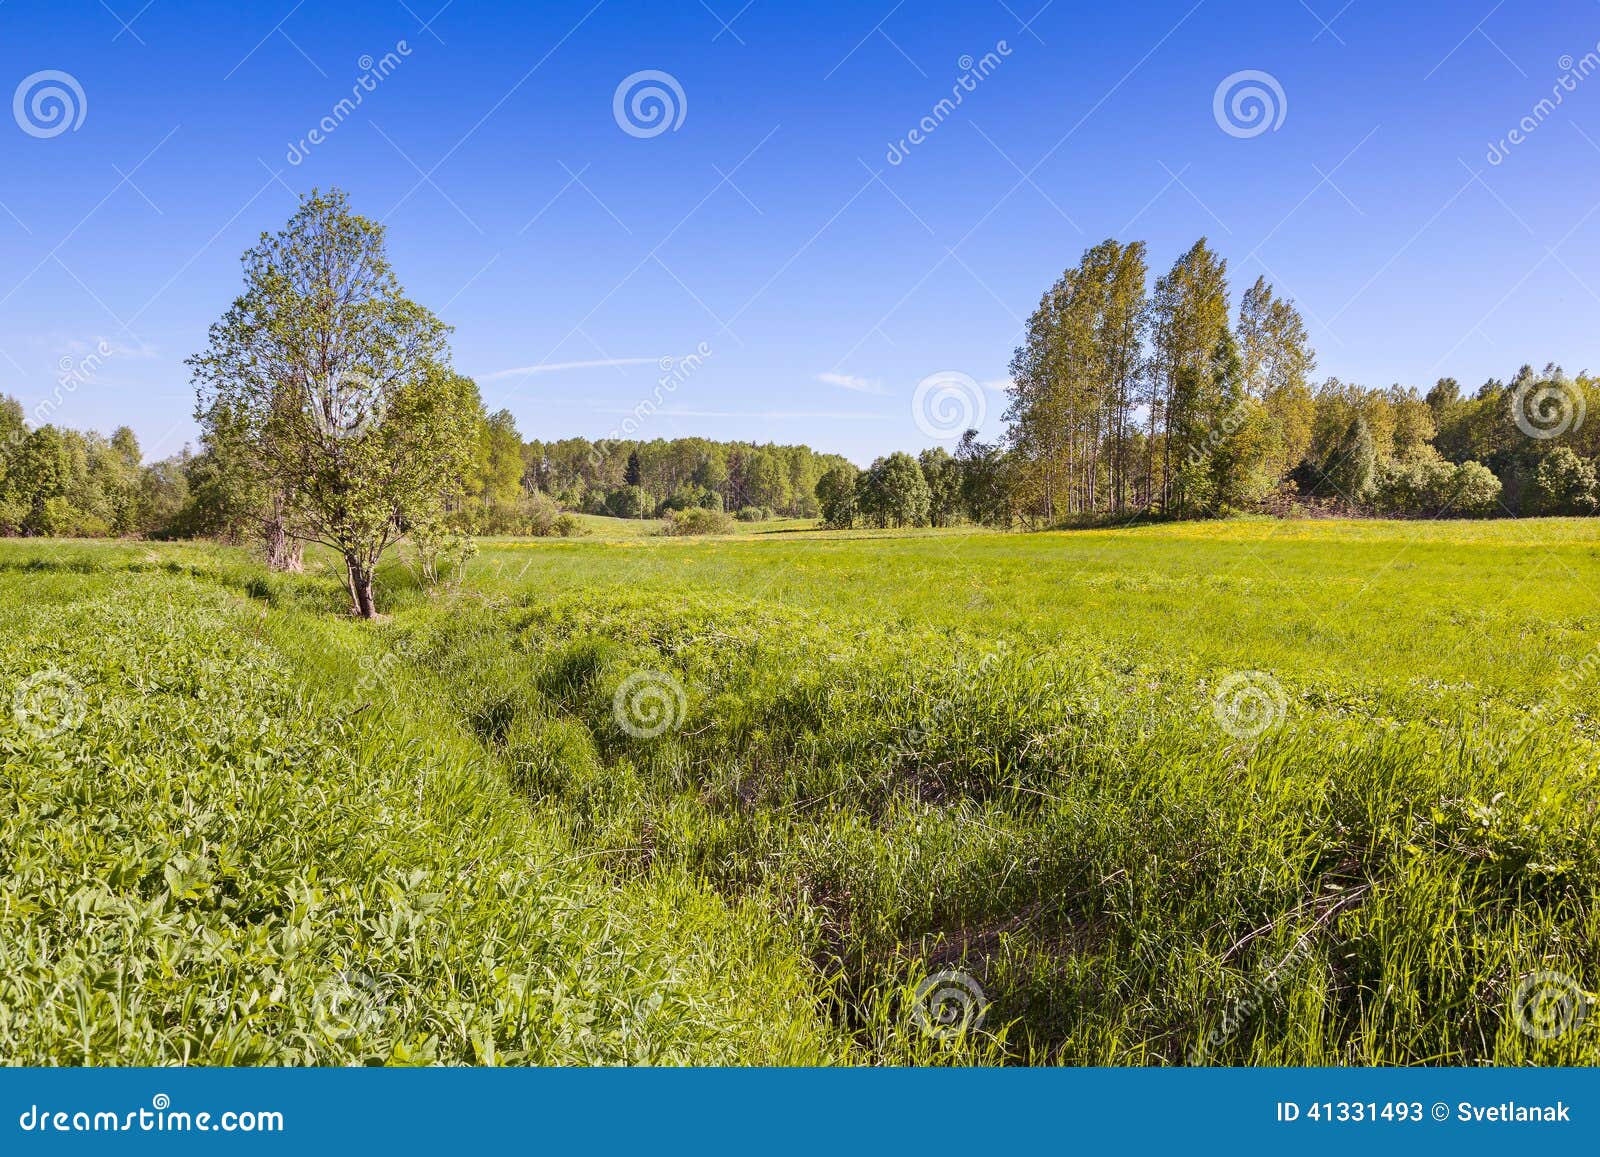 Summer Meadow With Green Grass And Trees Stock Image Image Of Nature